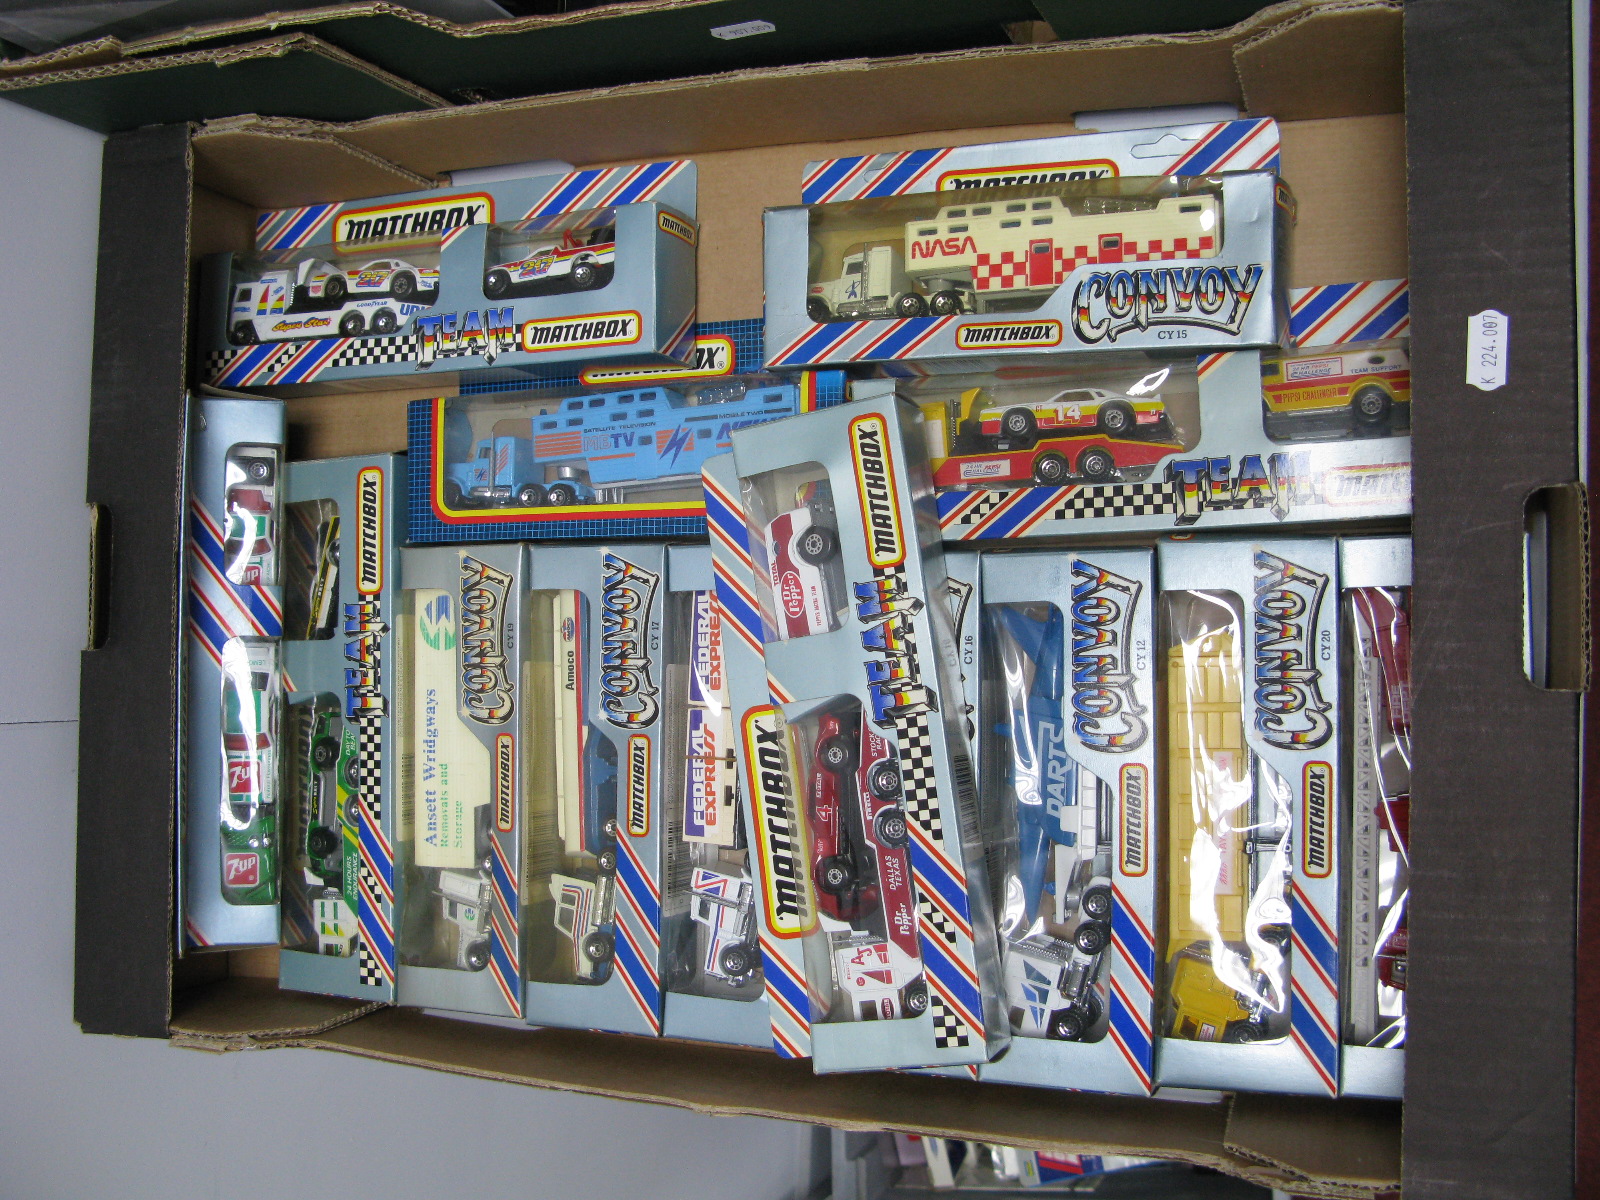 Fourteen Boxed Outline American Diecast Commercial Vehicles by Matchbox, predominately from the